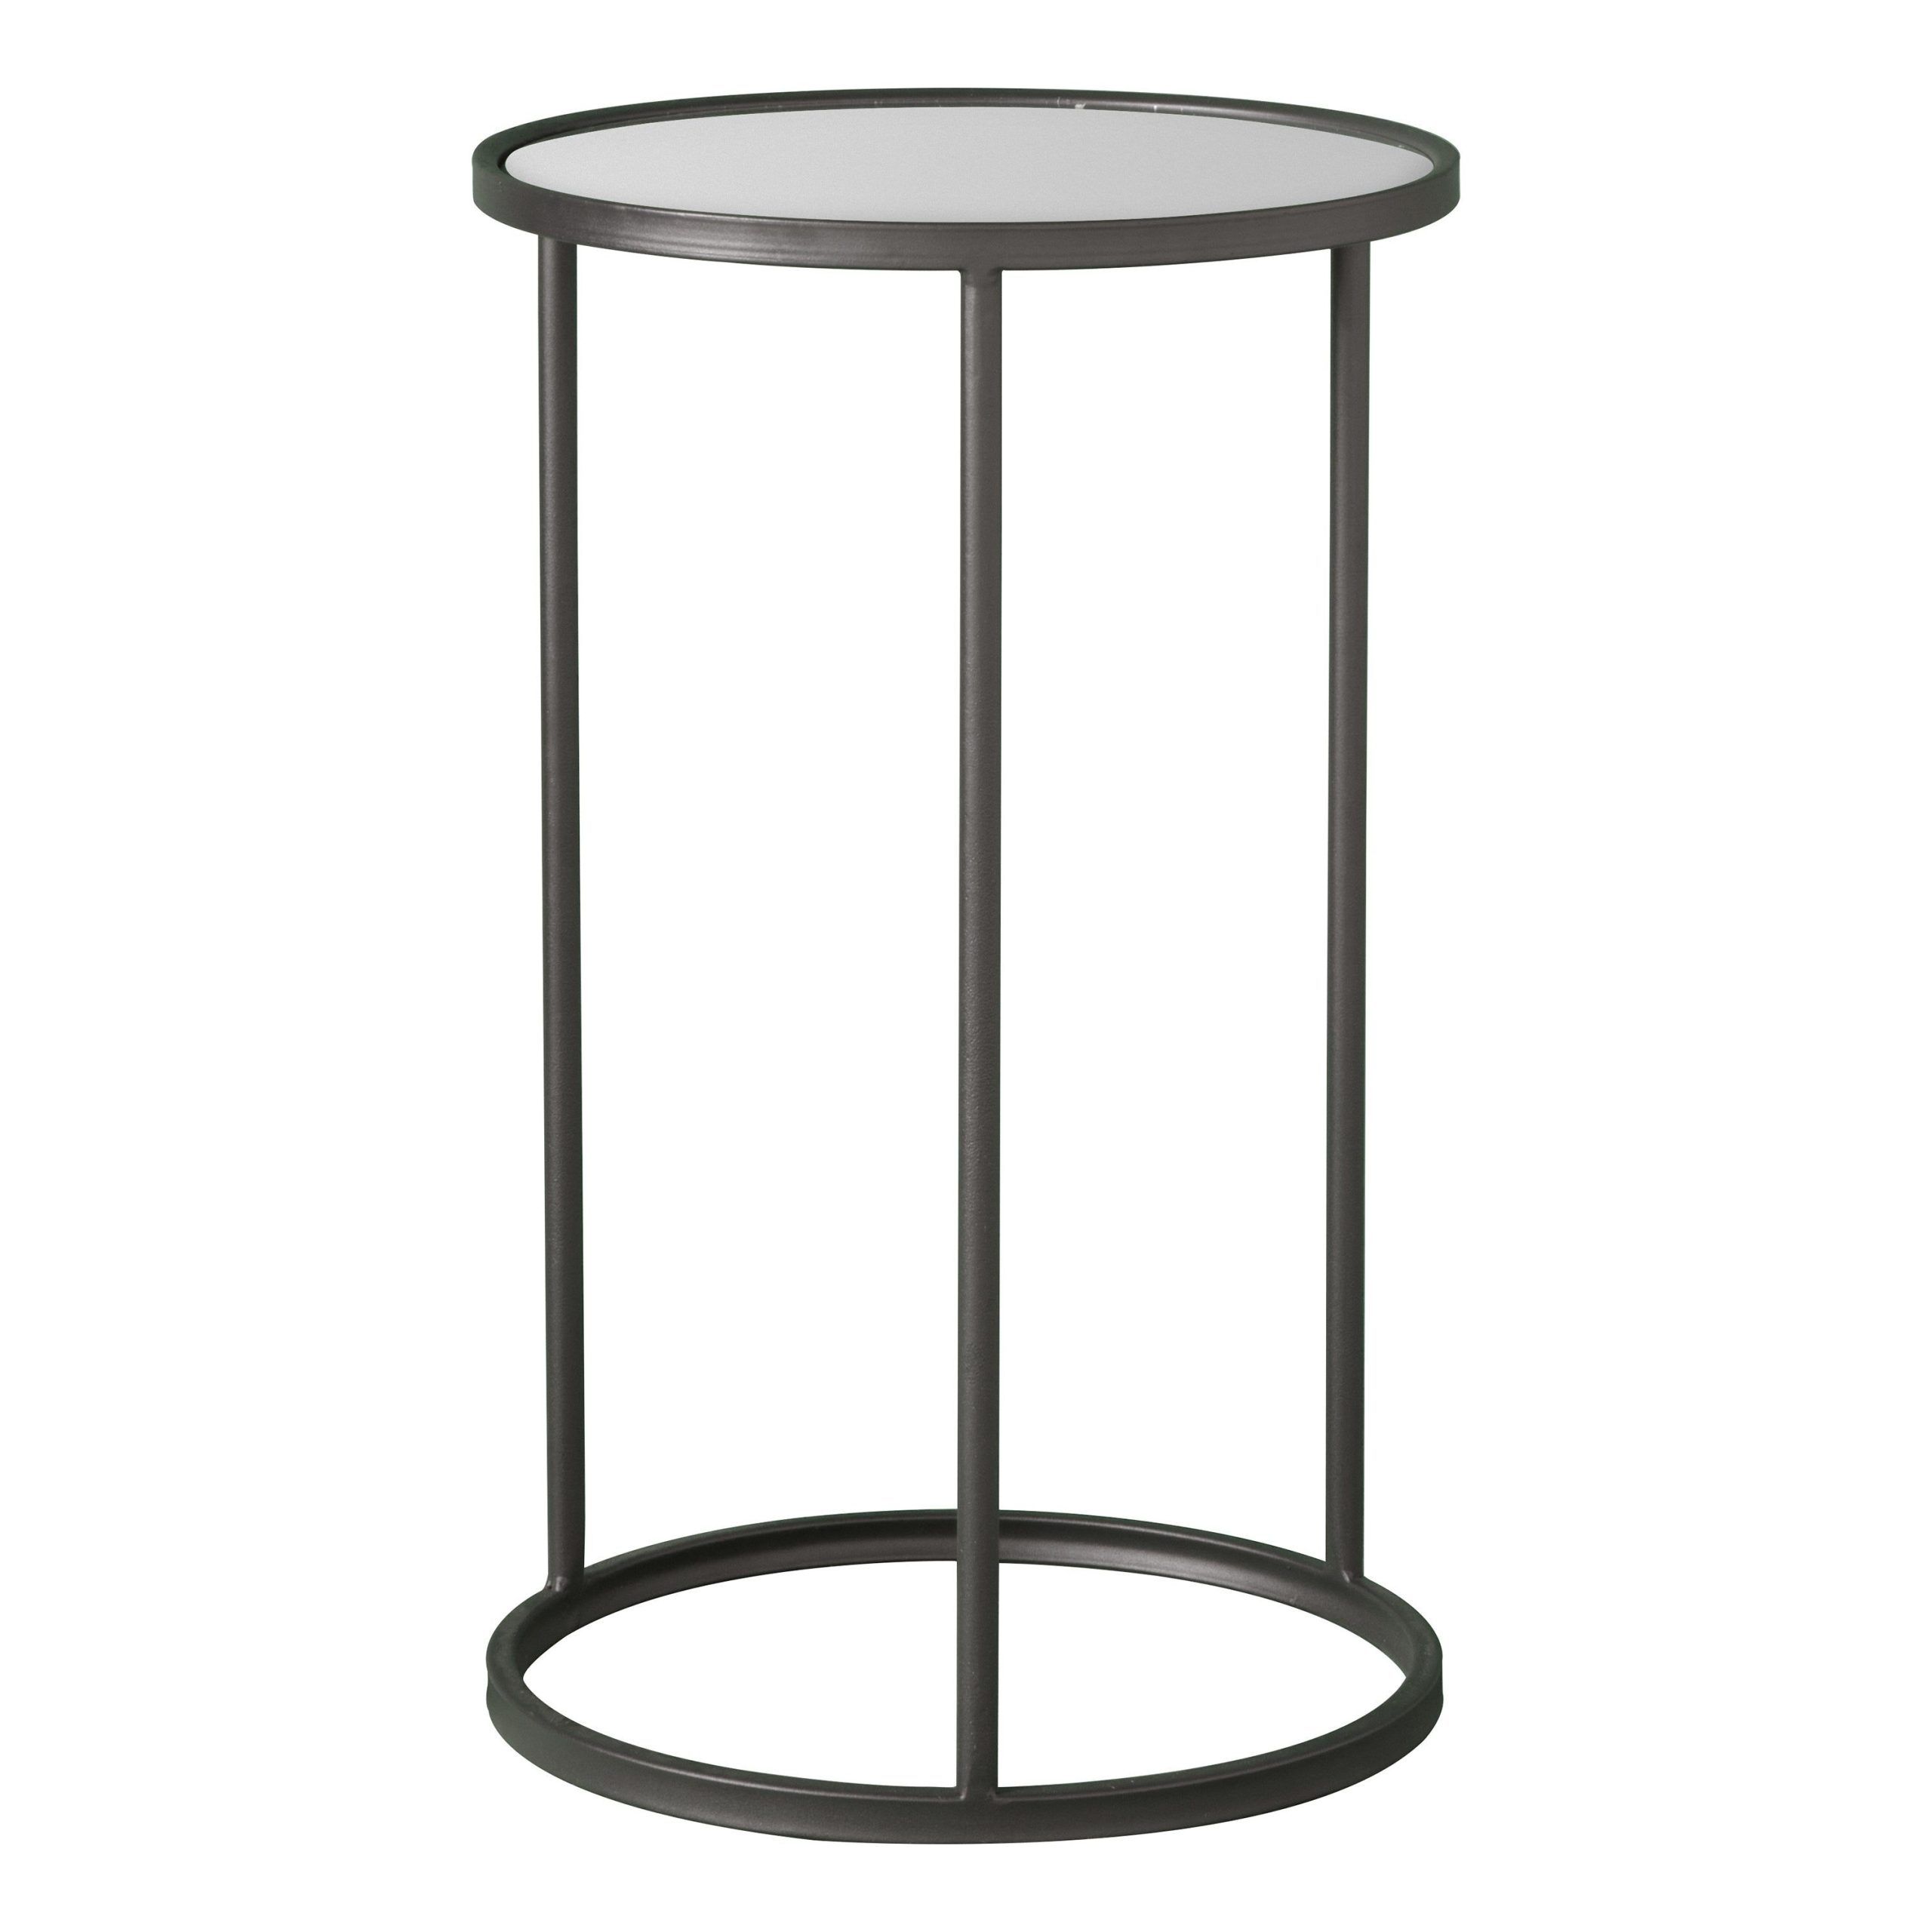 Huttone Side Table | Metal Side Table, Side Table, Mirror Side Table Intended For Metal Side Tables For Living Spaces (View 8 of 20)